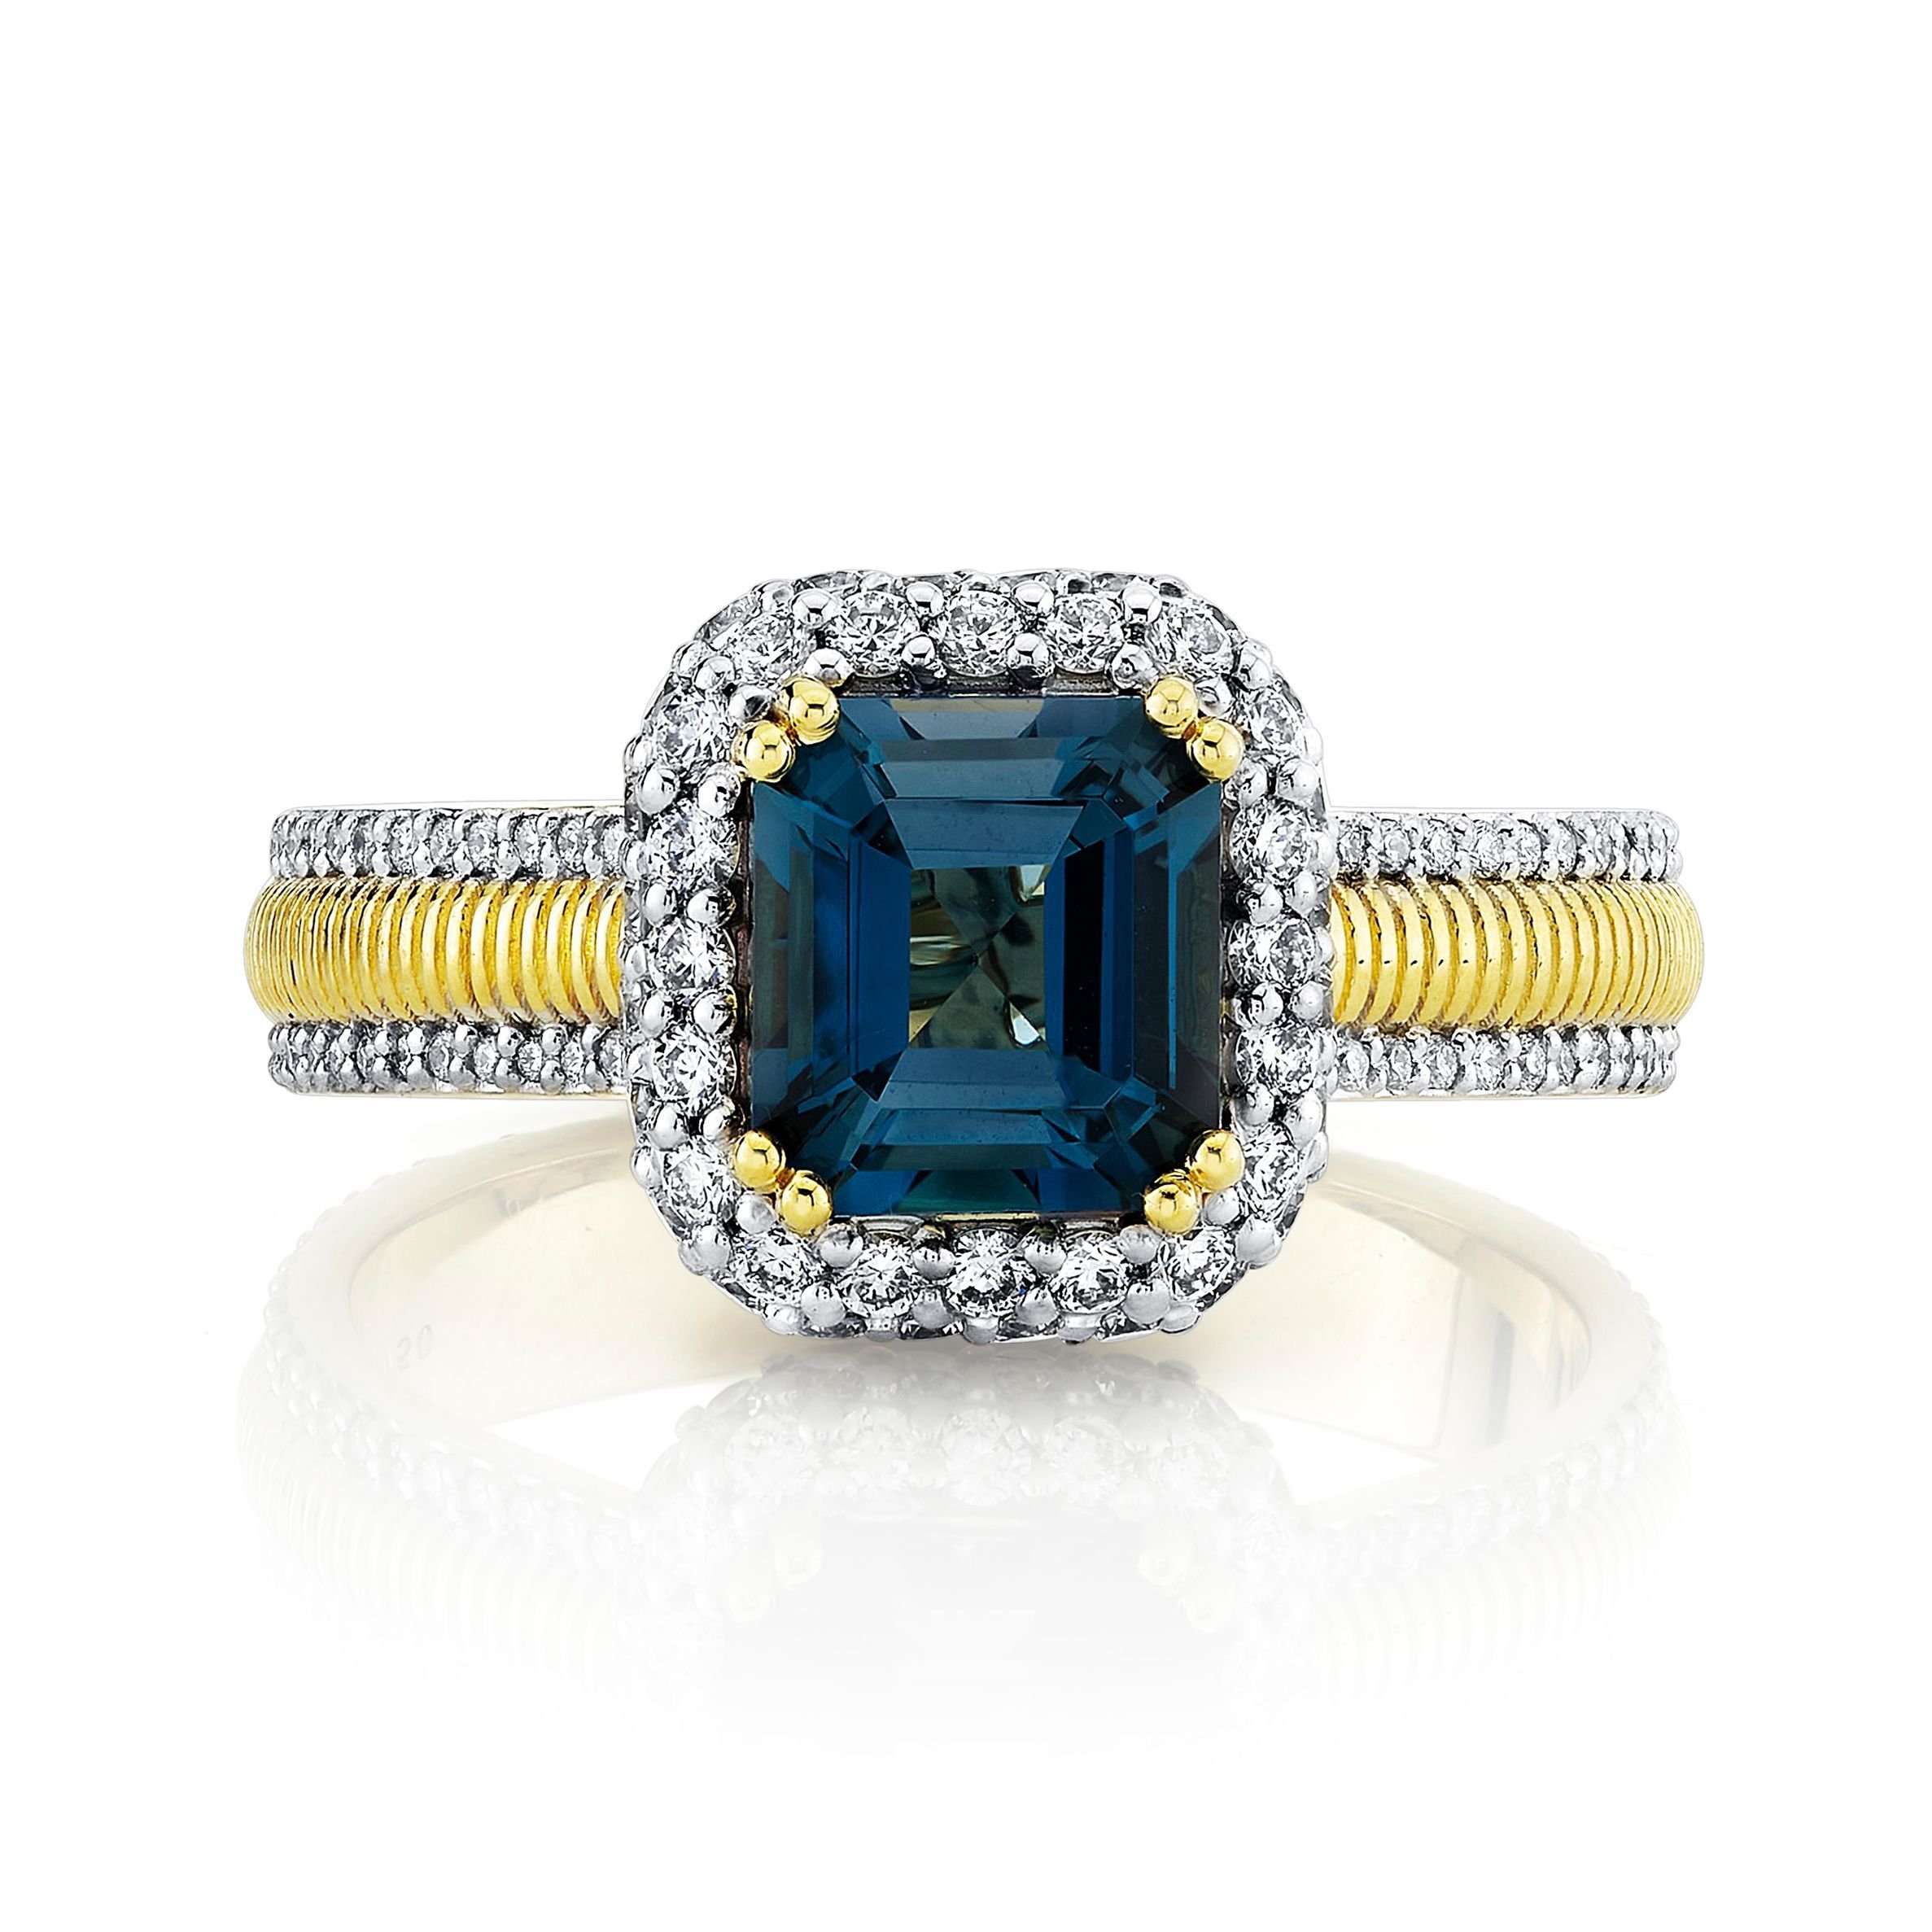 LONDON BLUE TOPAZ CUSHION RING WITH WHITE DIAMOND DETAILING AND STRIE SHANK